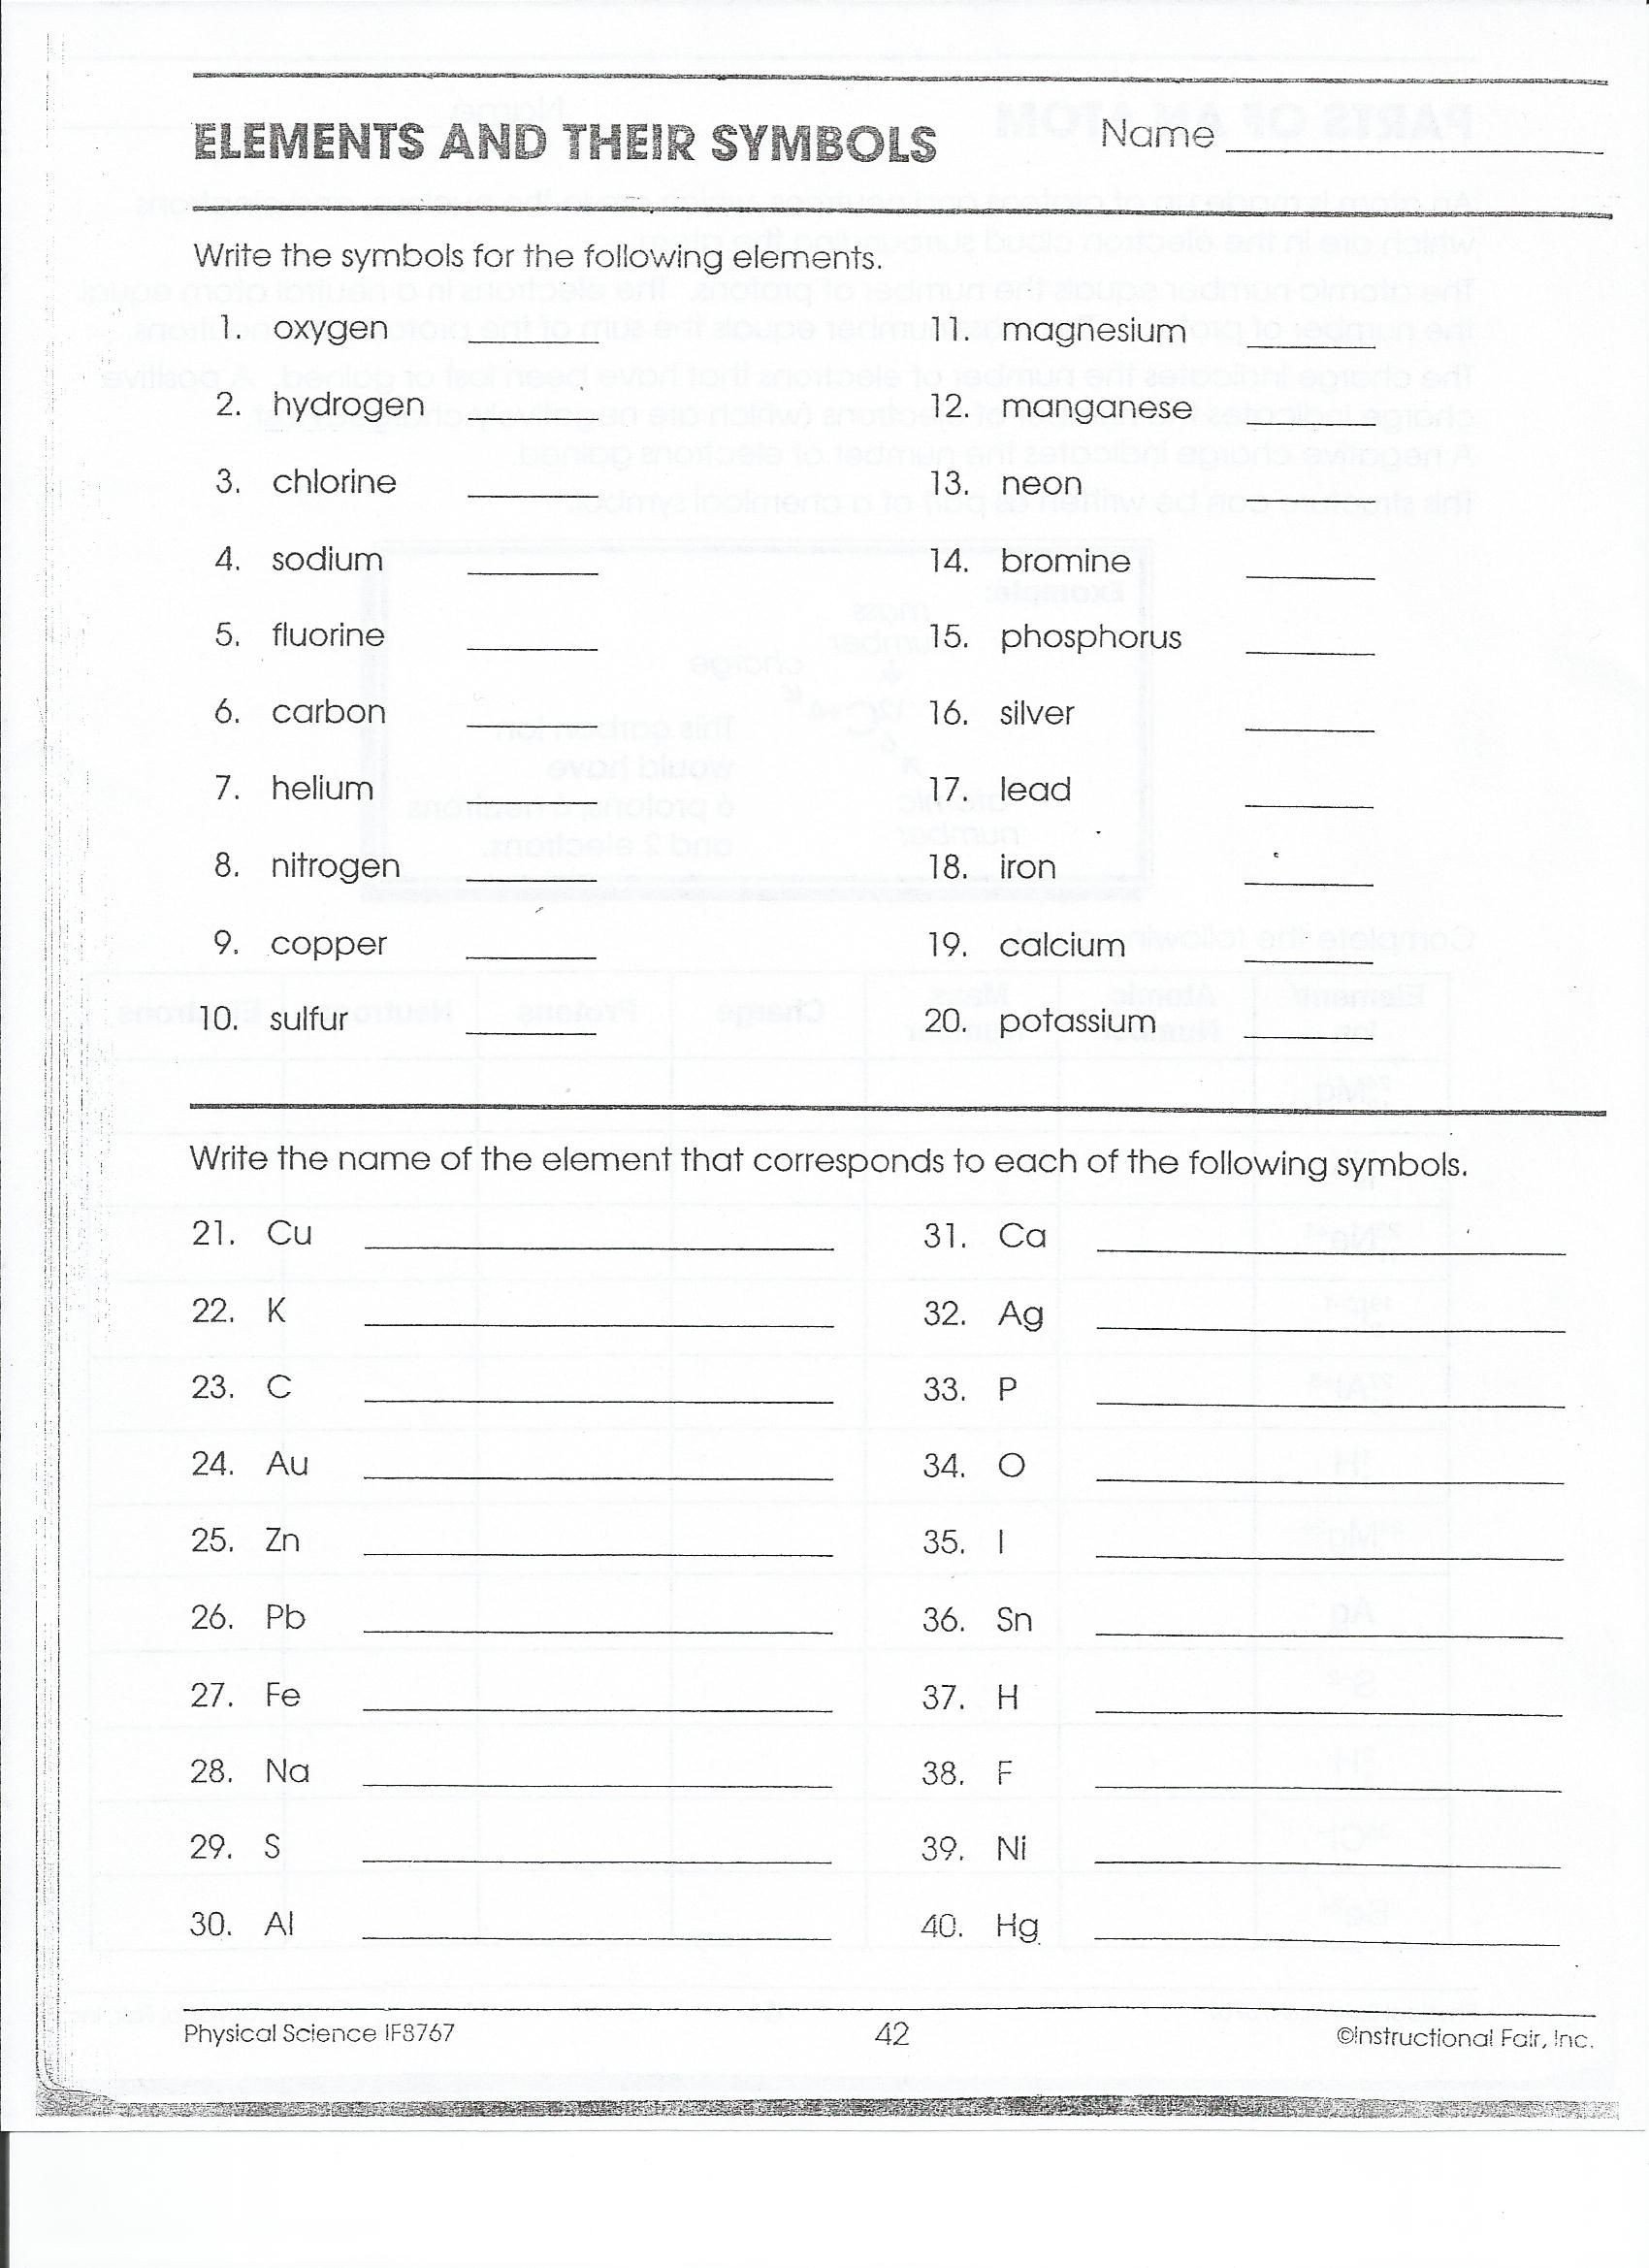 Periodically Puzzling Worksheet Answers